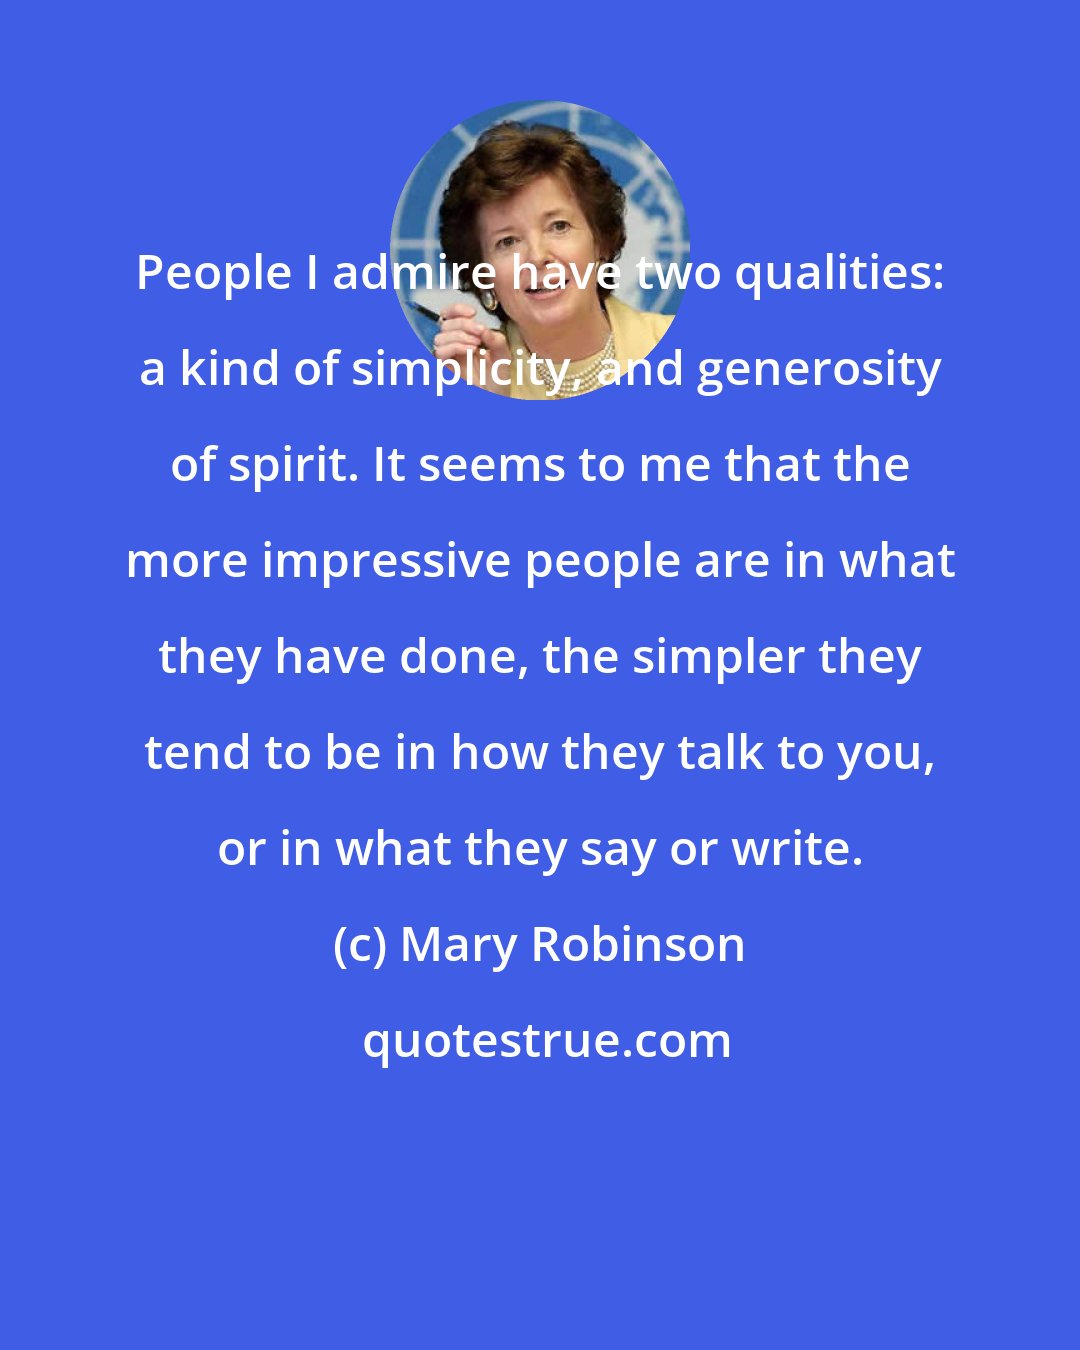 Mary Robinson: People I admire have two qualities: a kind of simplicity, and generosity of spirit. It seems to me that the more impressive people are in what they have done, the simpler they tend to be in how they talk to you, or in what they say or write.